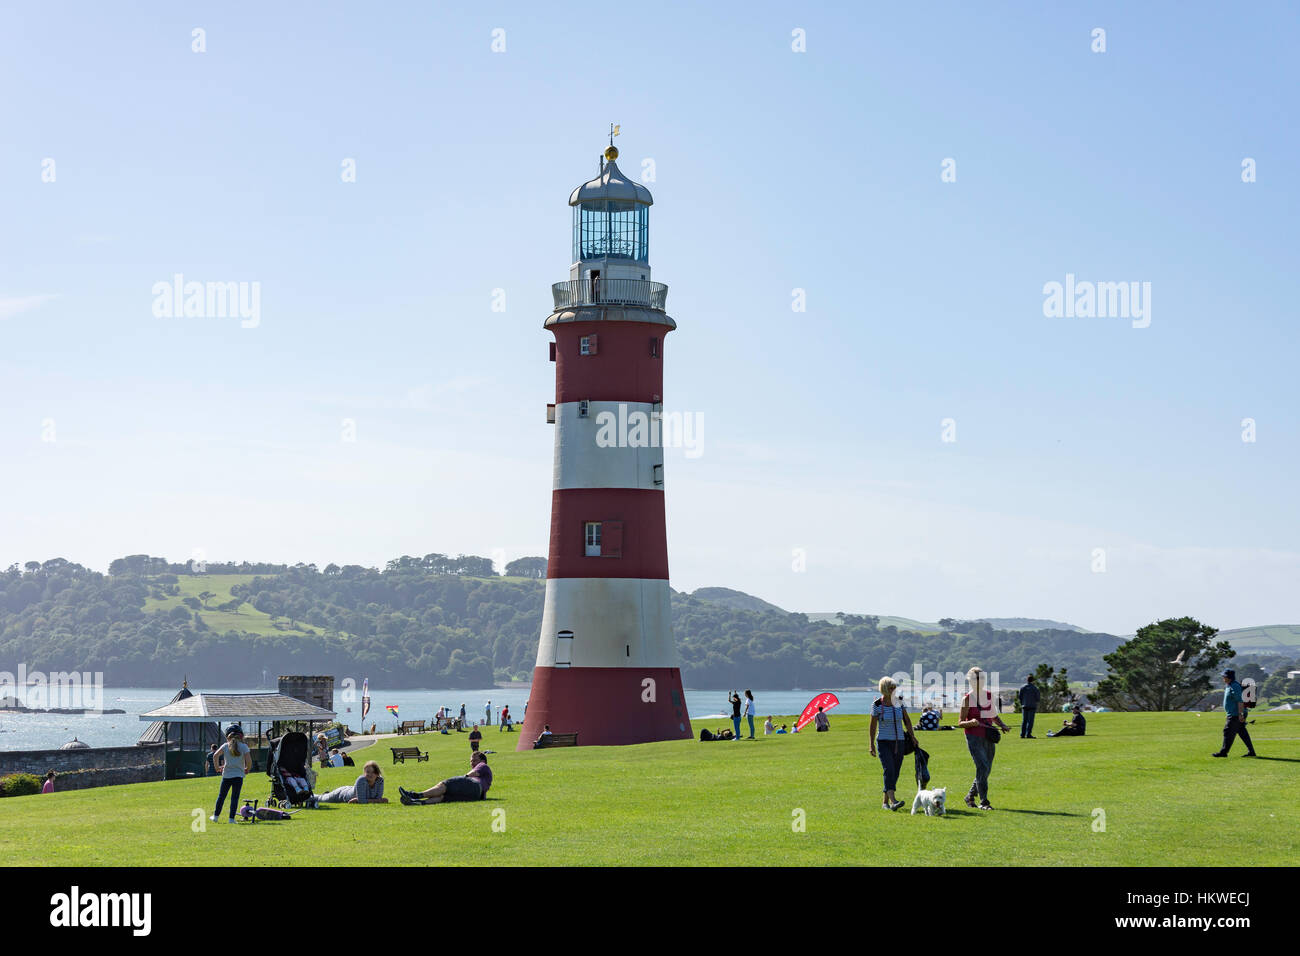 Smeaton's Tower, Plymouth Hoe, Plymouth, Devon, Angleterre, Royaume-Uni Banque D'Images